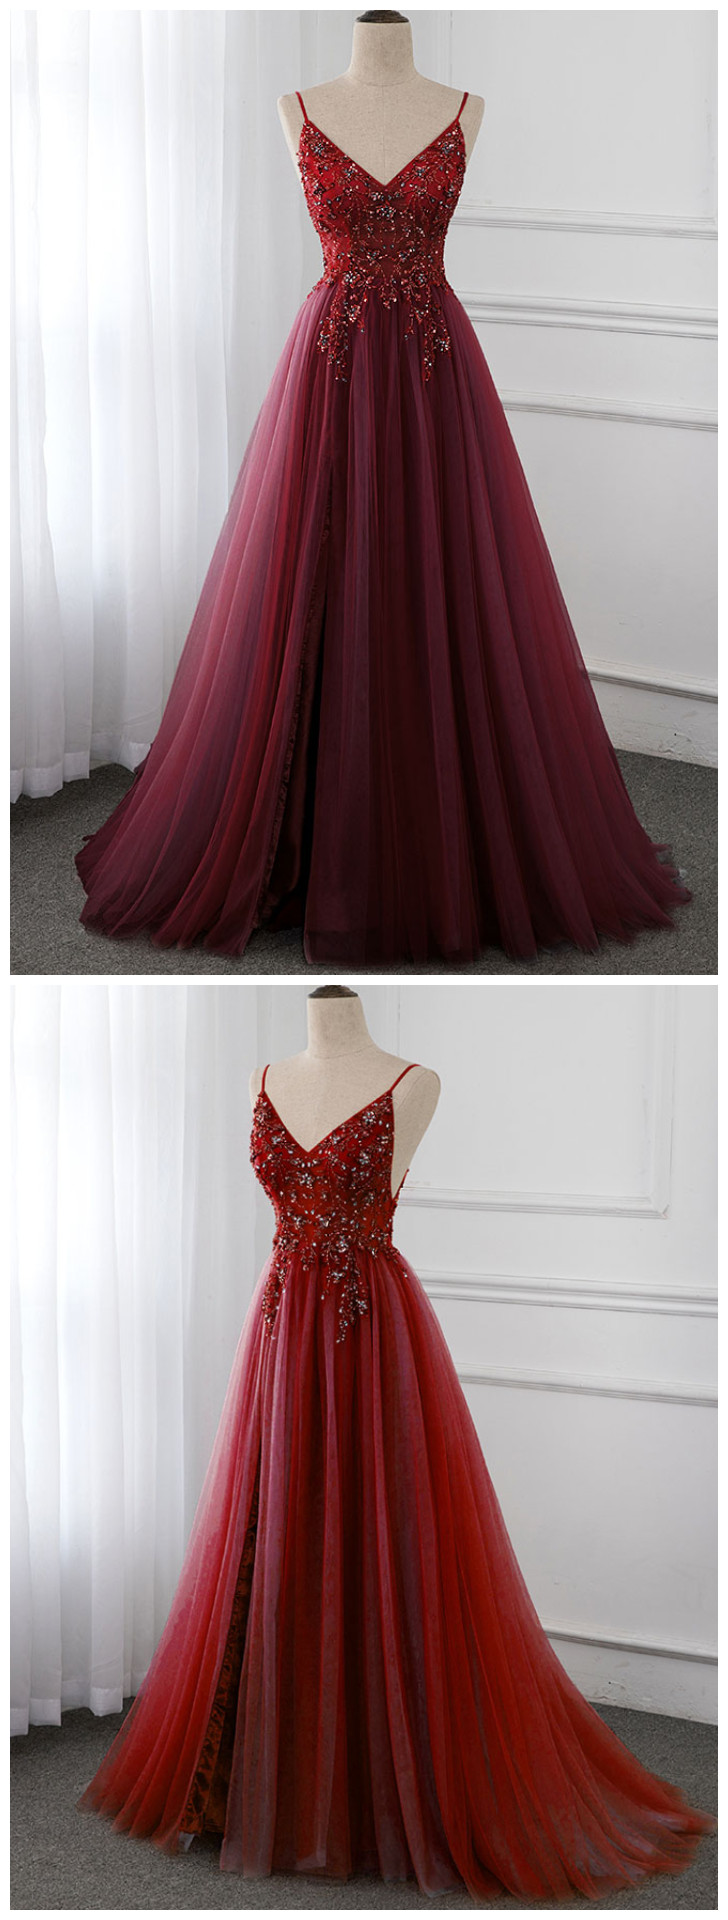 Fashion Lux Sweet Wine Red Crystal Long Prom Dresses 2020 Straps Spaghetti Tulle Evening Gown Slit